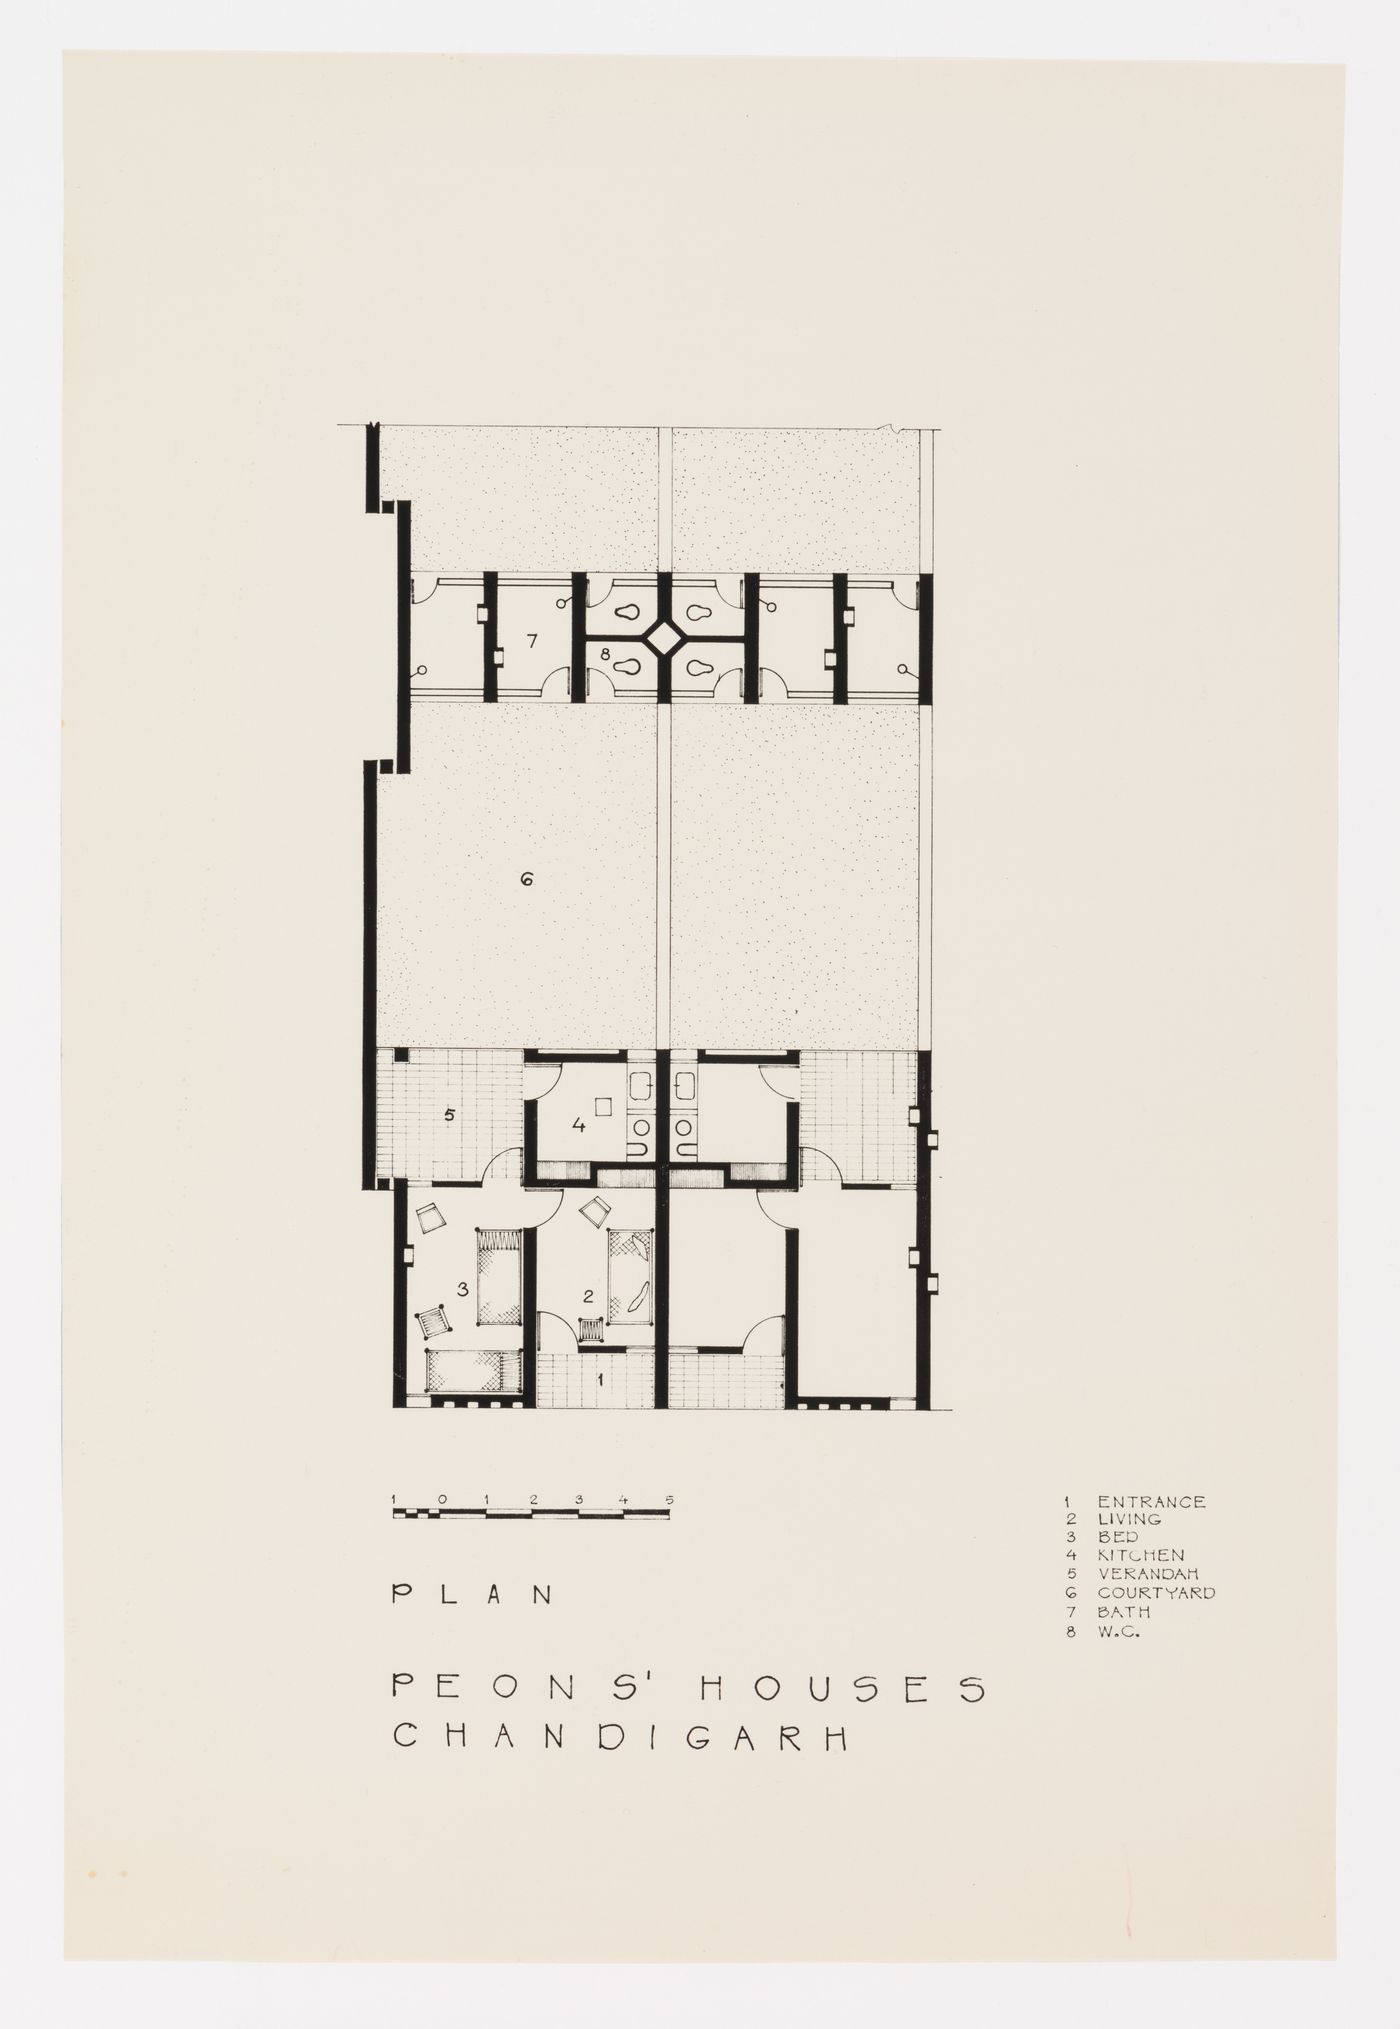 Plan for the Peons' Houses in Chandigarh, India